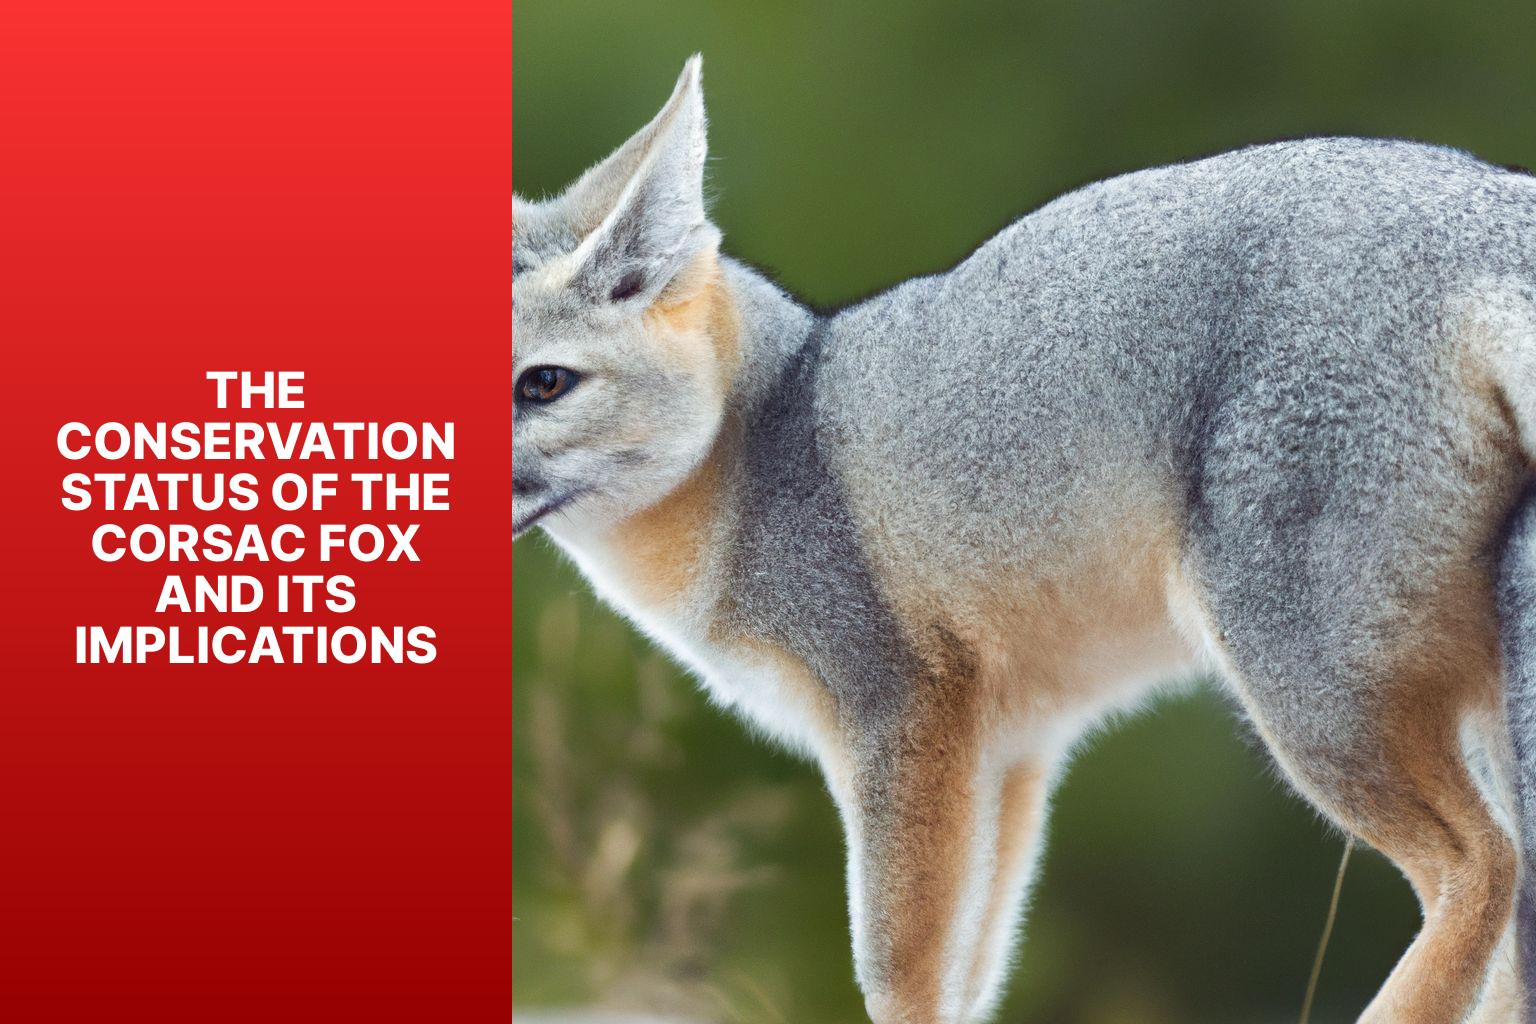 The Conservation Status of the Corsac Fox and its Implications - Corsac Fox in Popular Culture 